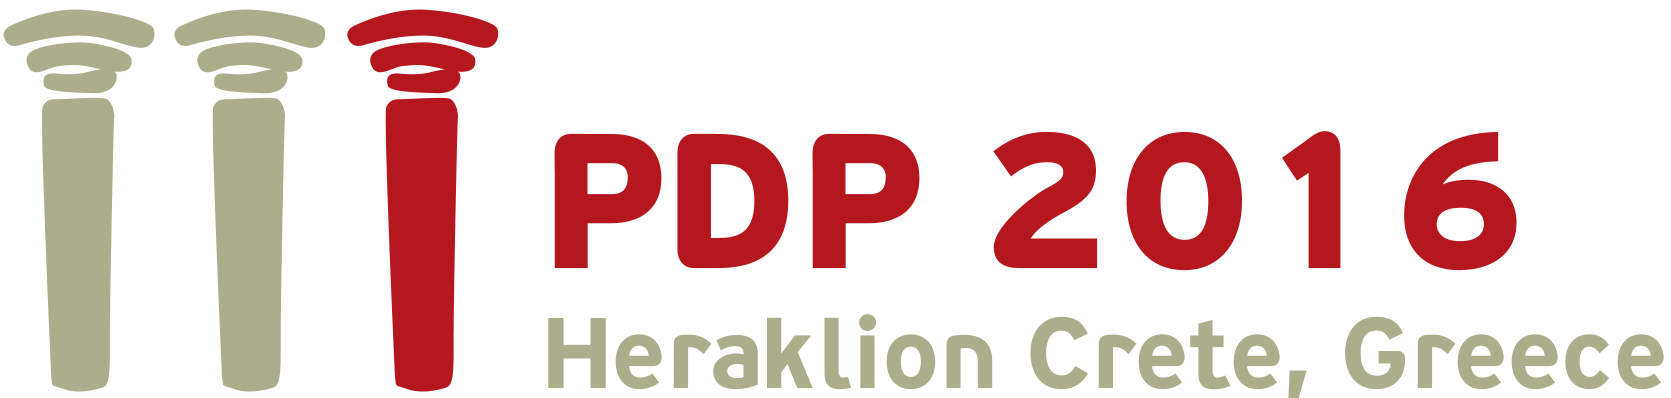 PDP2013 21st International Conference on Parallel, Distributed and Network-Based Processing